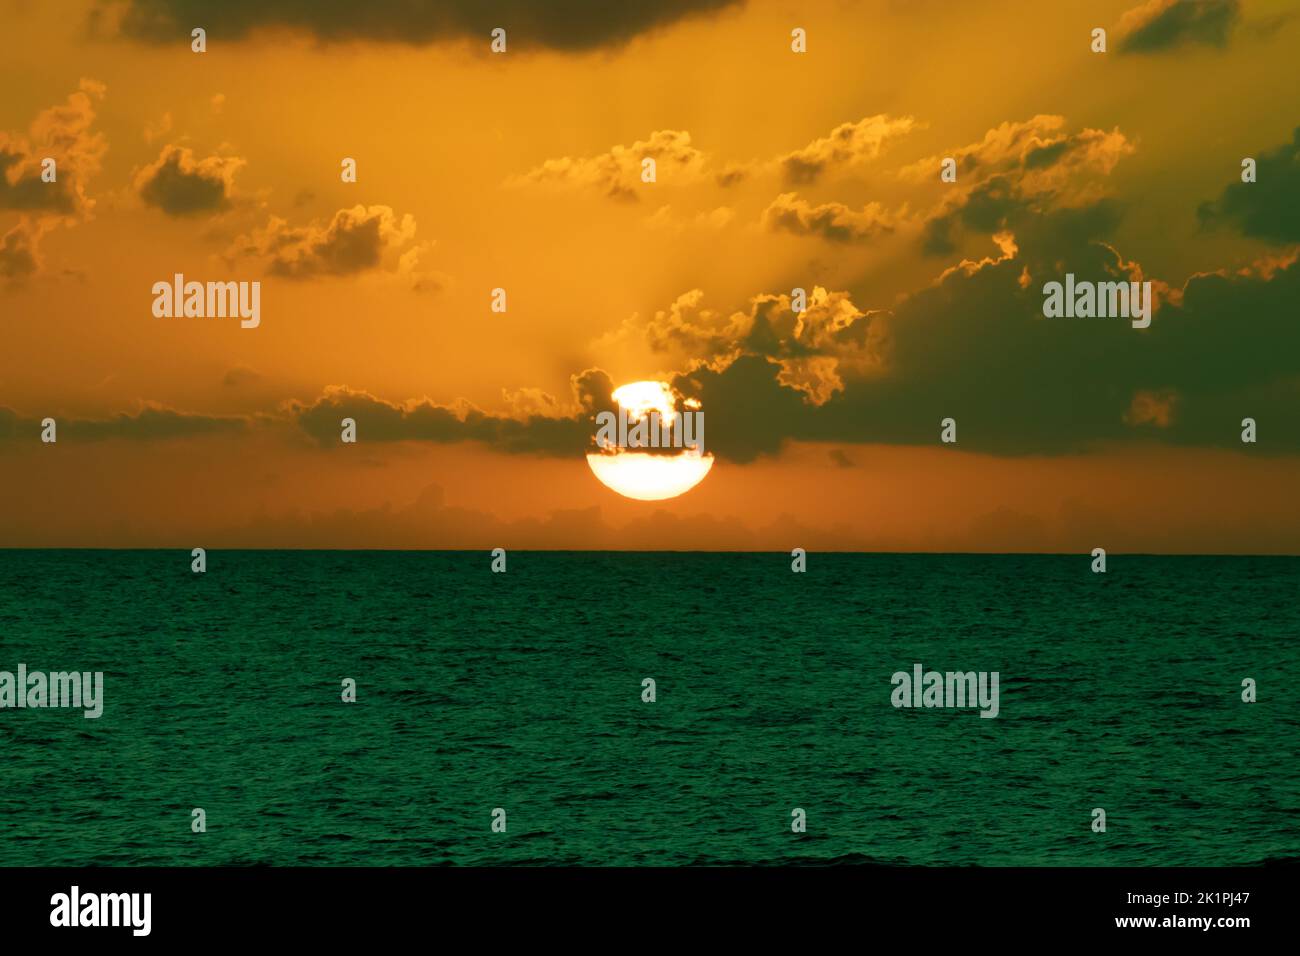 Vintage tone sunset landscape. Sun disc behind clouds. Blue sea, orange sky. End of day, elapsed time idea concept. Horizontal photo. No people. Stock Photo